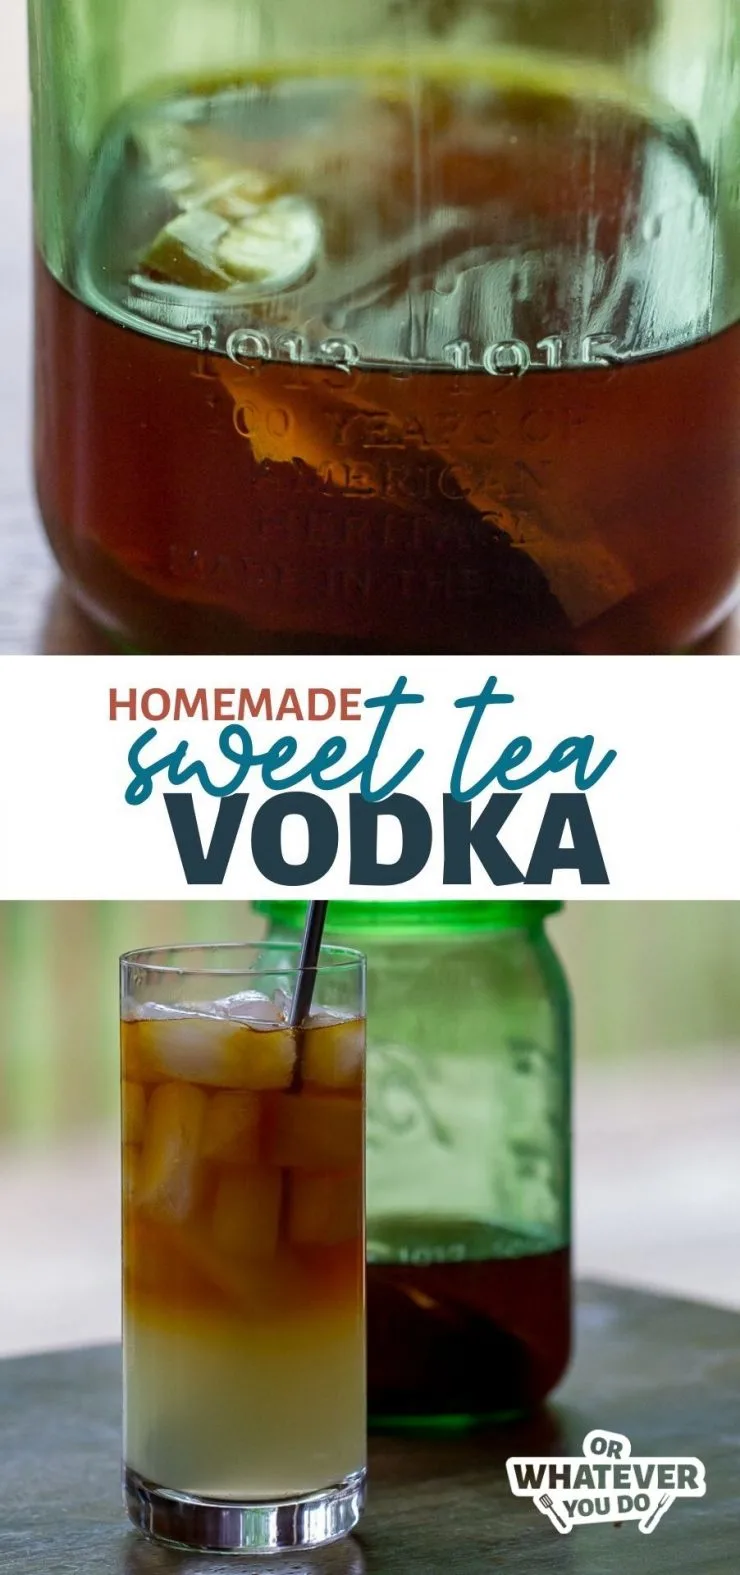 Homemade Sweet Tea Vodka with text on the image